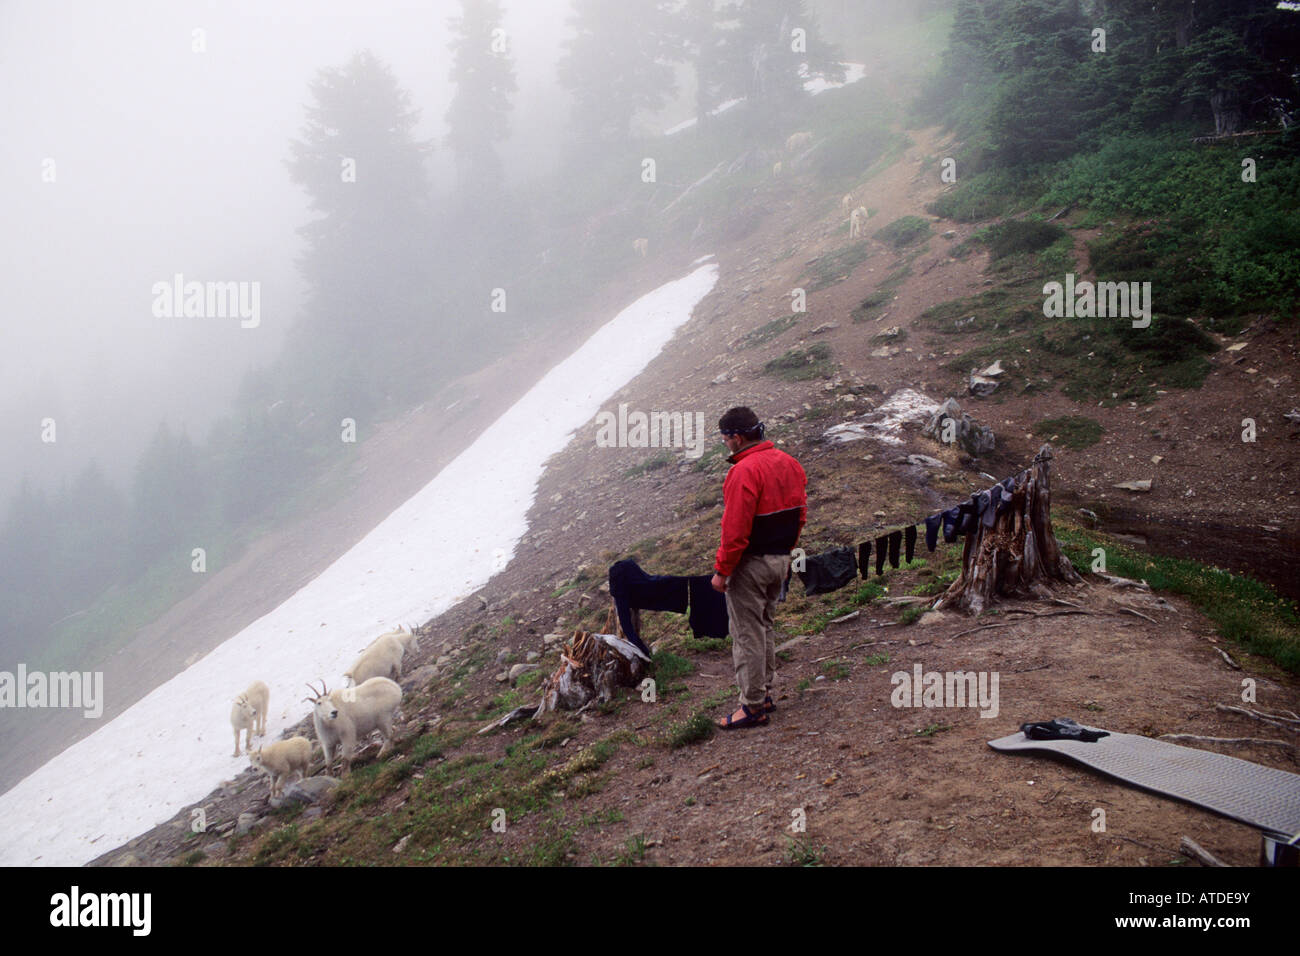 Backpacker at camp observing Mountain goat herd, Olympic National Park backcountry, Washington State Stock Photo